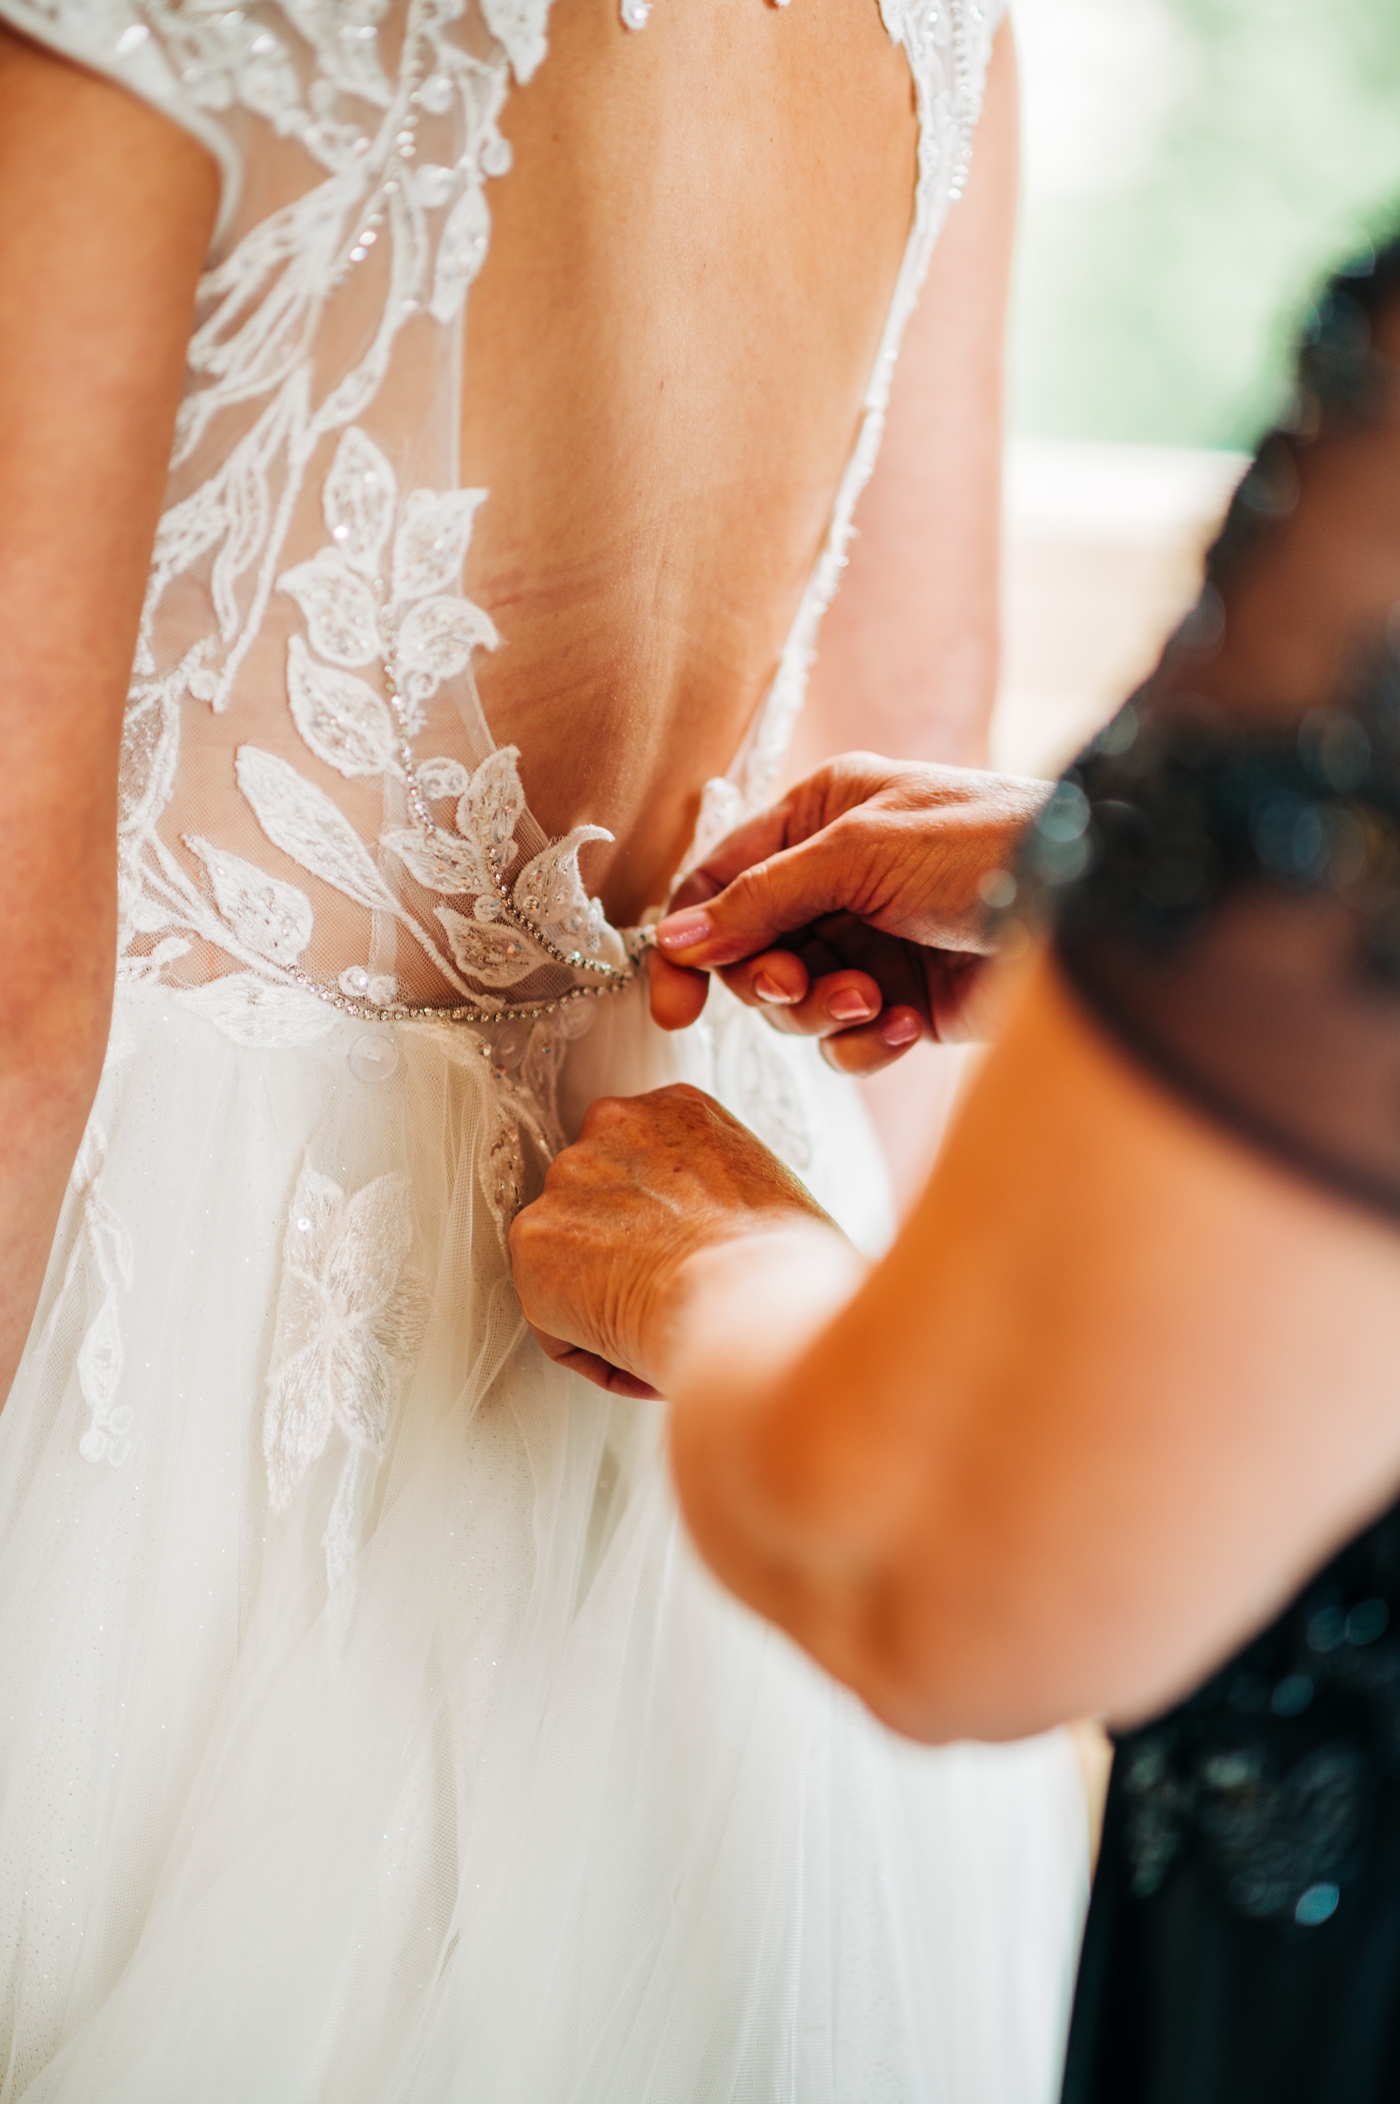 Mother of the bride helping bride into lace wedding gown